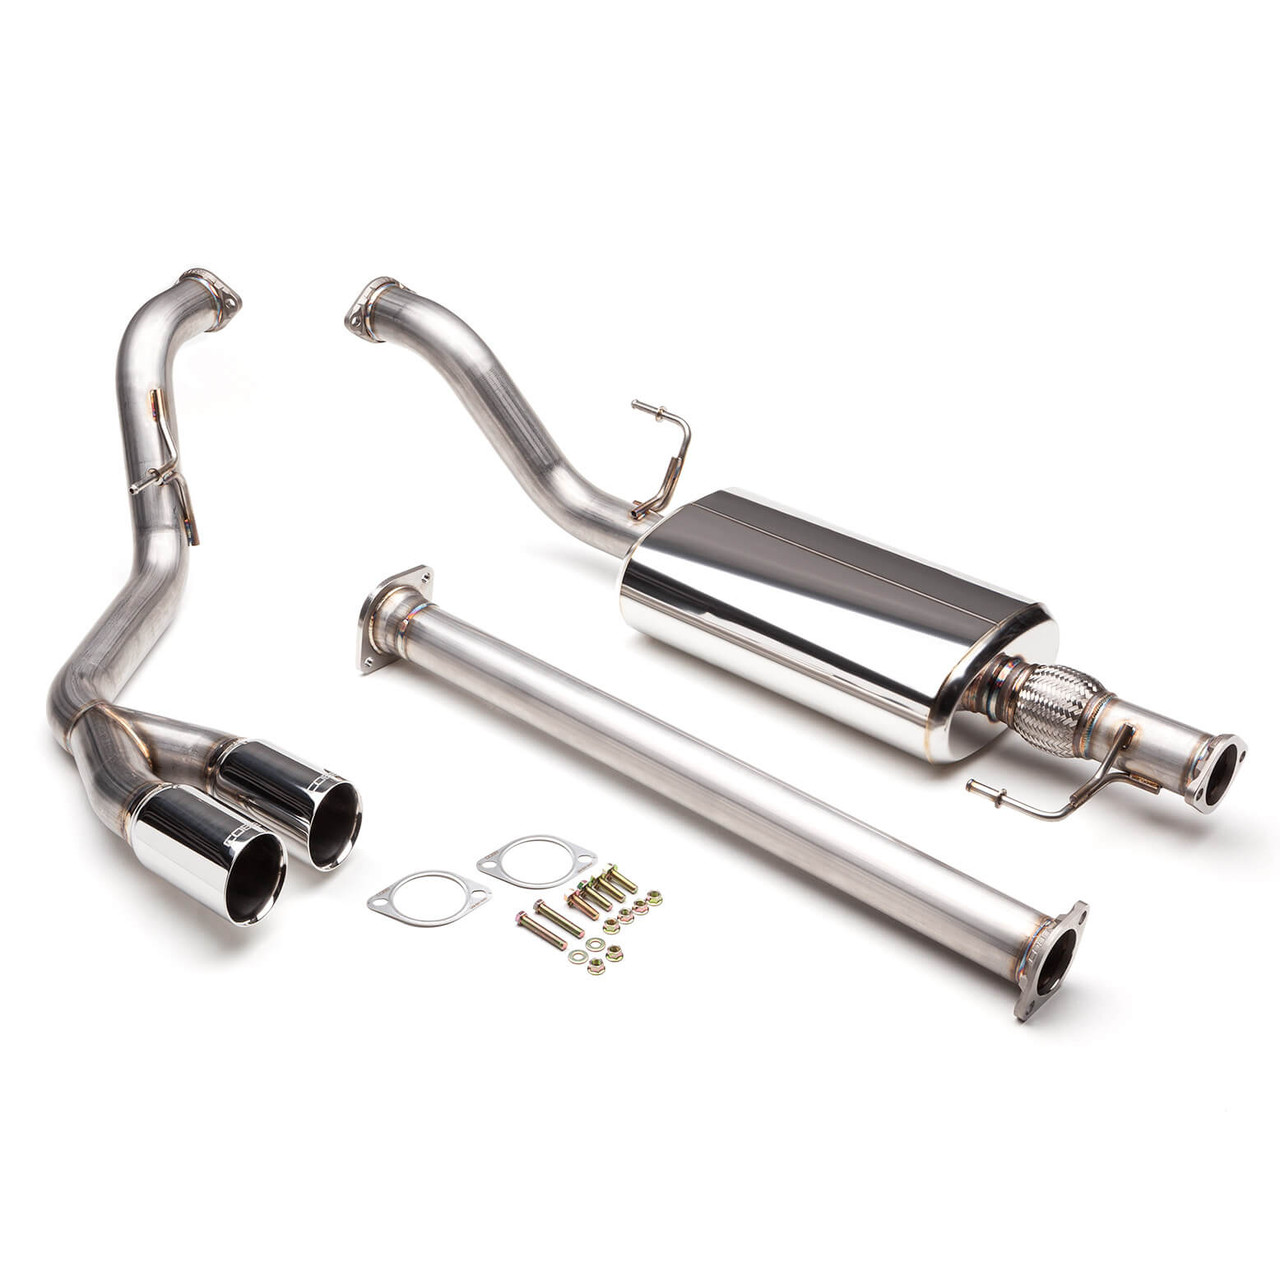 Cobb Catback Exhaust For 17-20 Ford F-150 Ecoboost - 5F1100